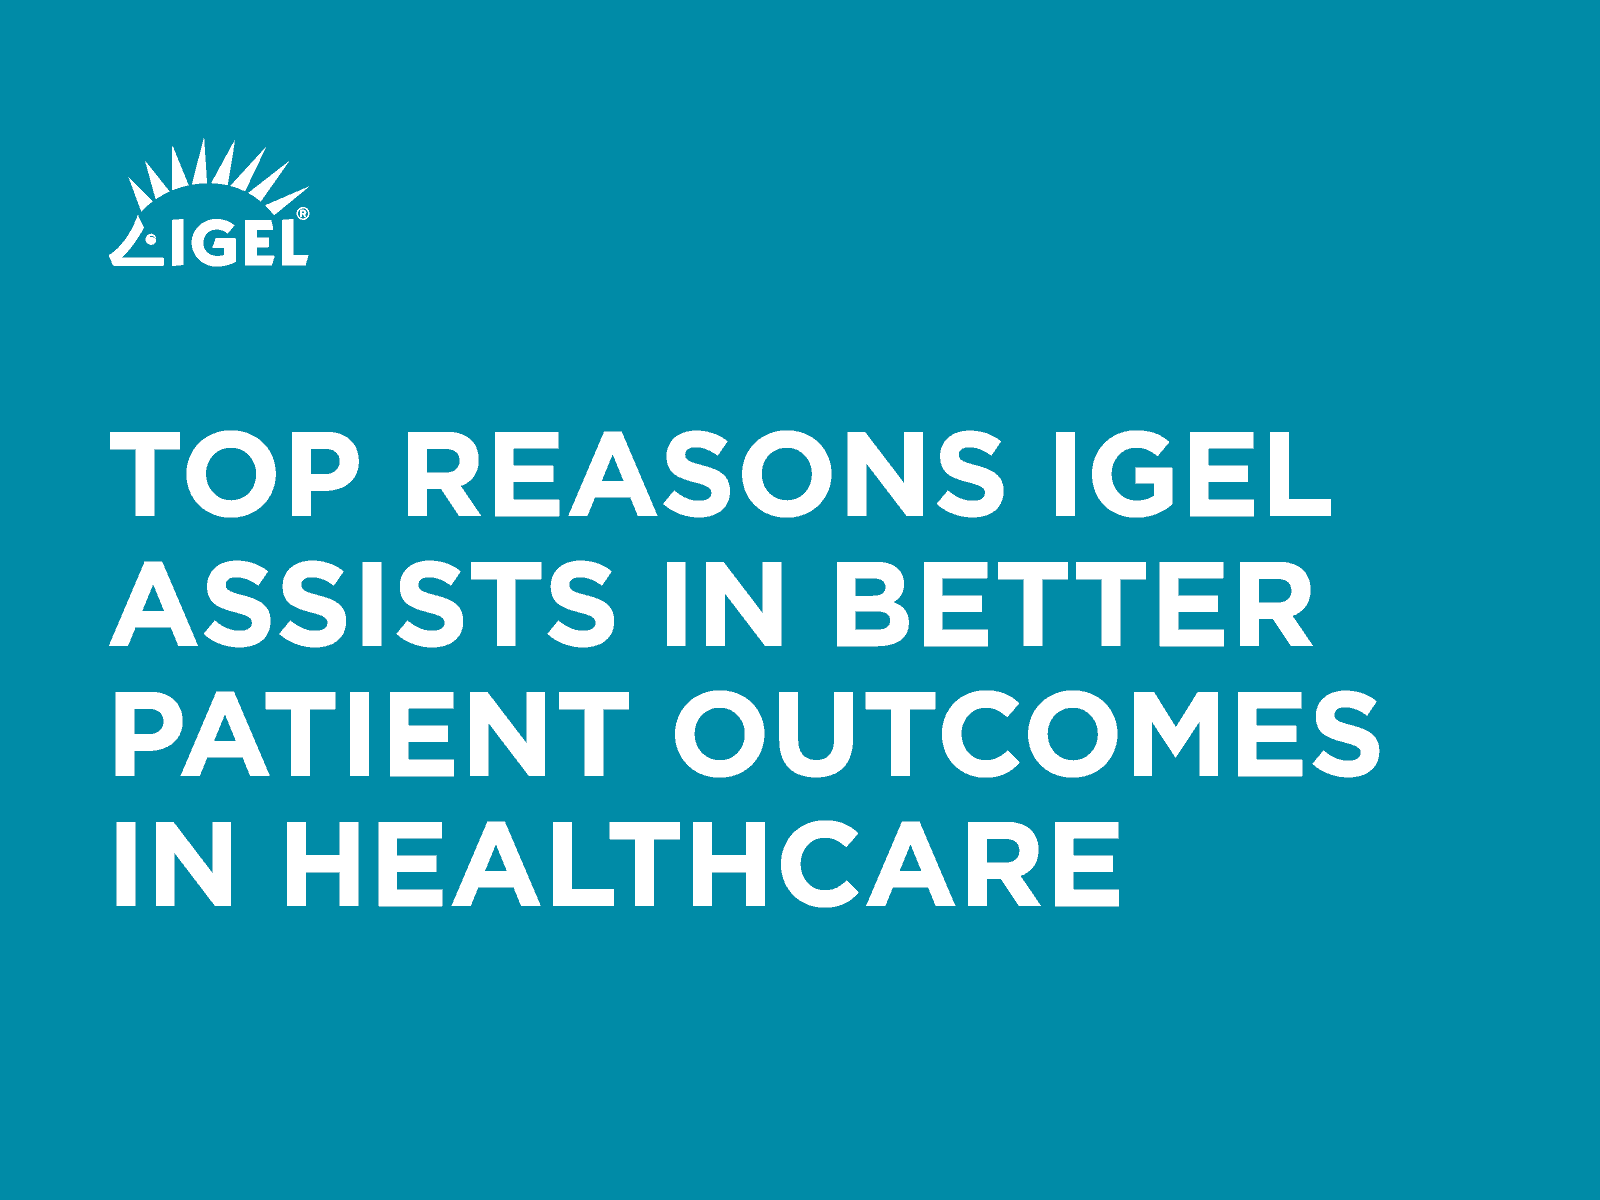 Top Reasons IGEL Assists in Better Patient Outcomes in Healthcare